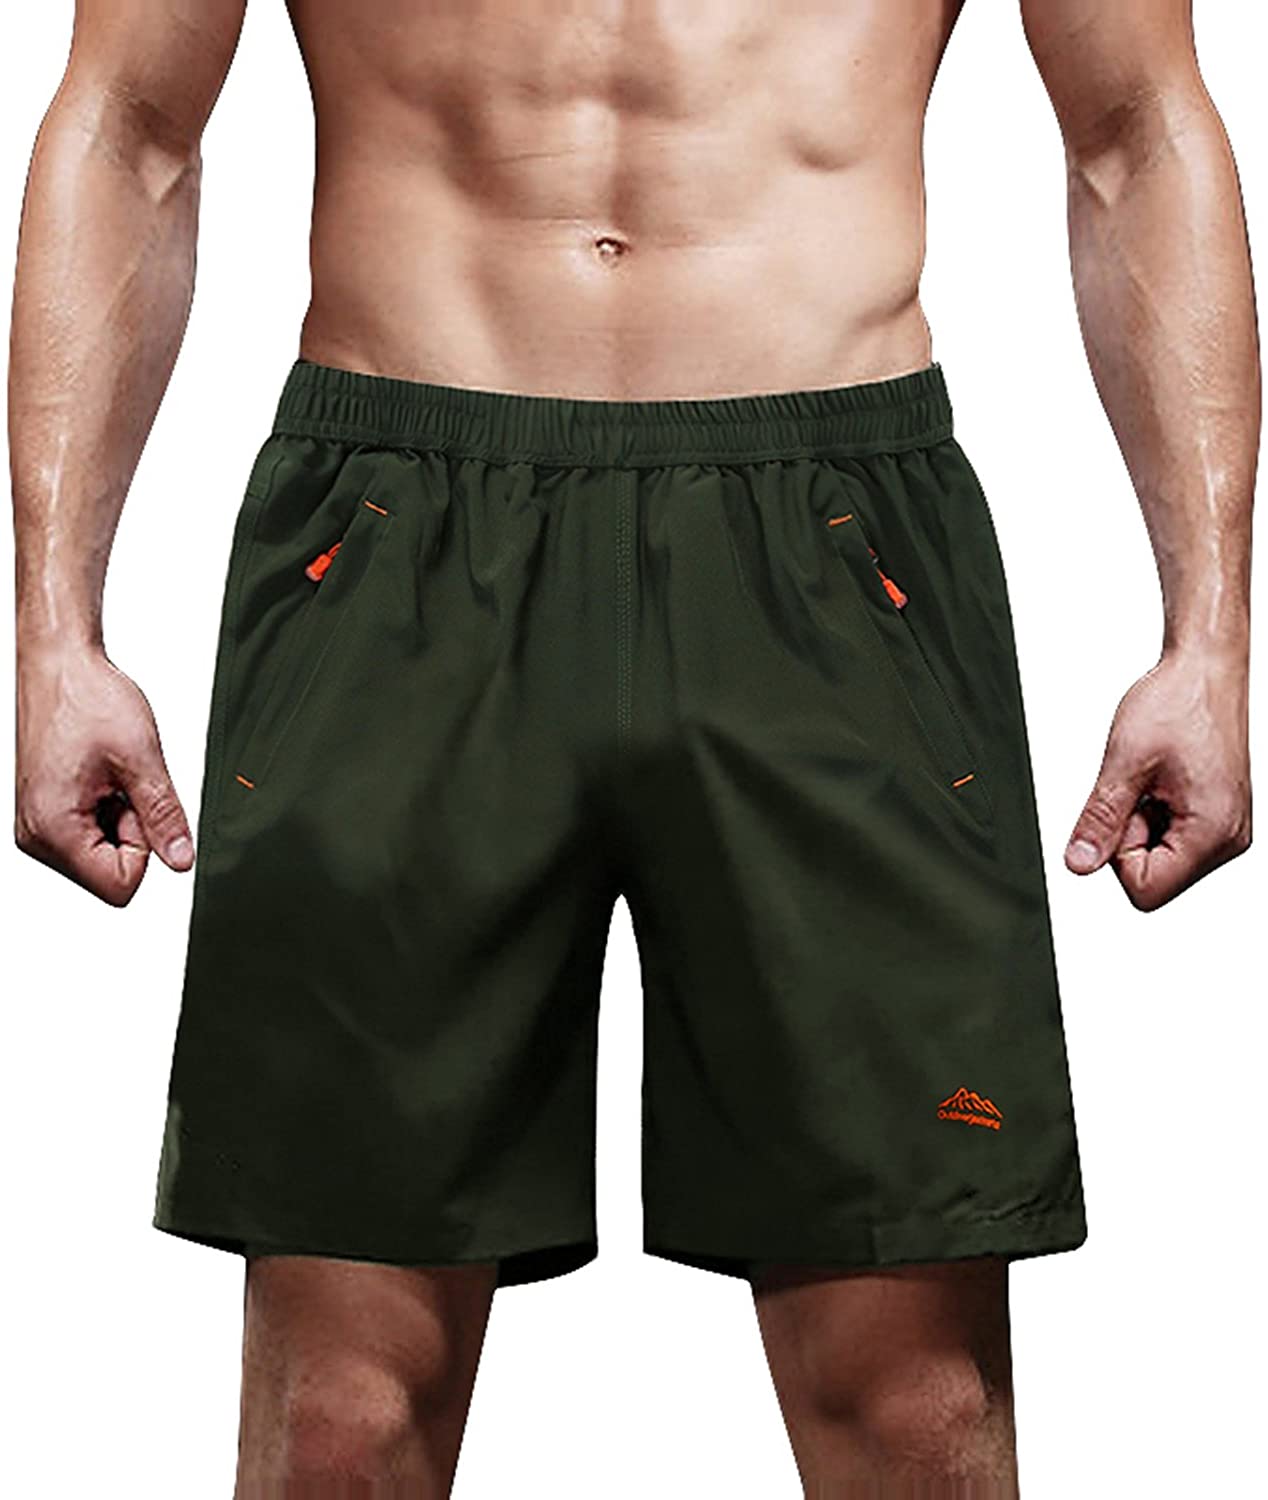 EXEKE Mens Quick Dry Shorts Gym Workout Shorts Lightweight Running Shorts with Zipper Pockets